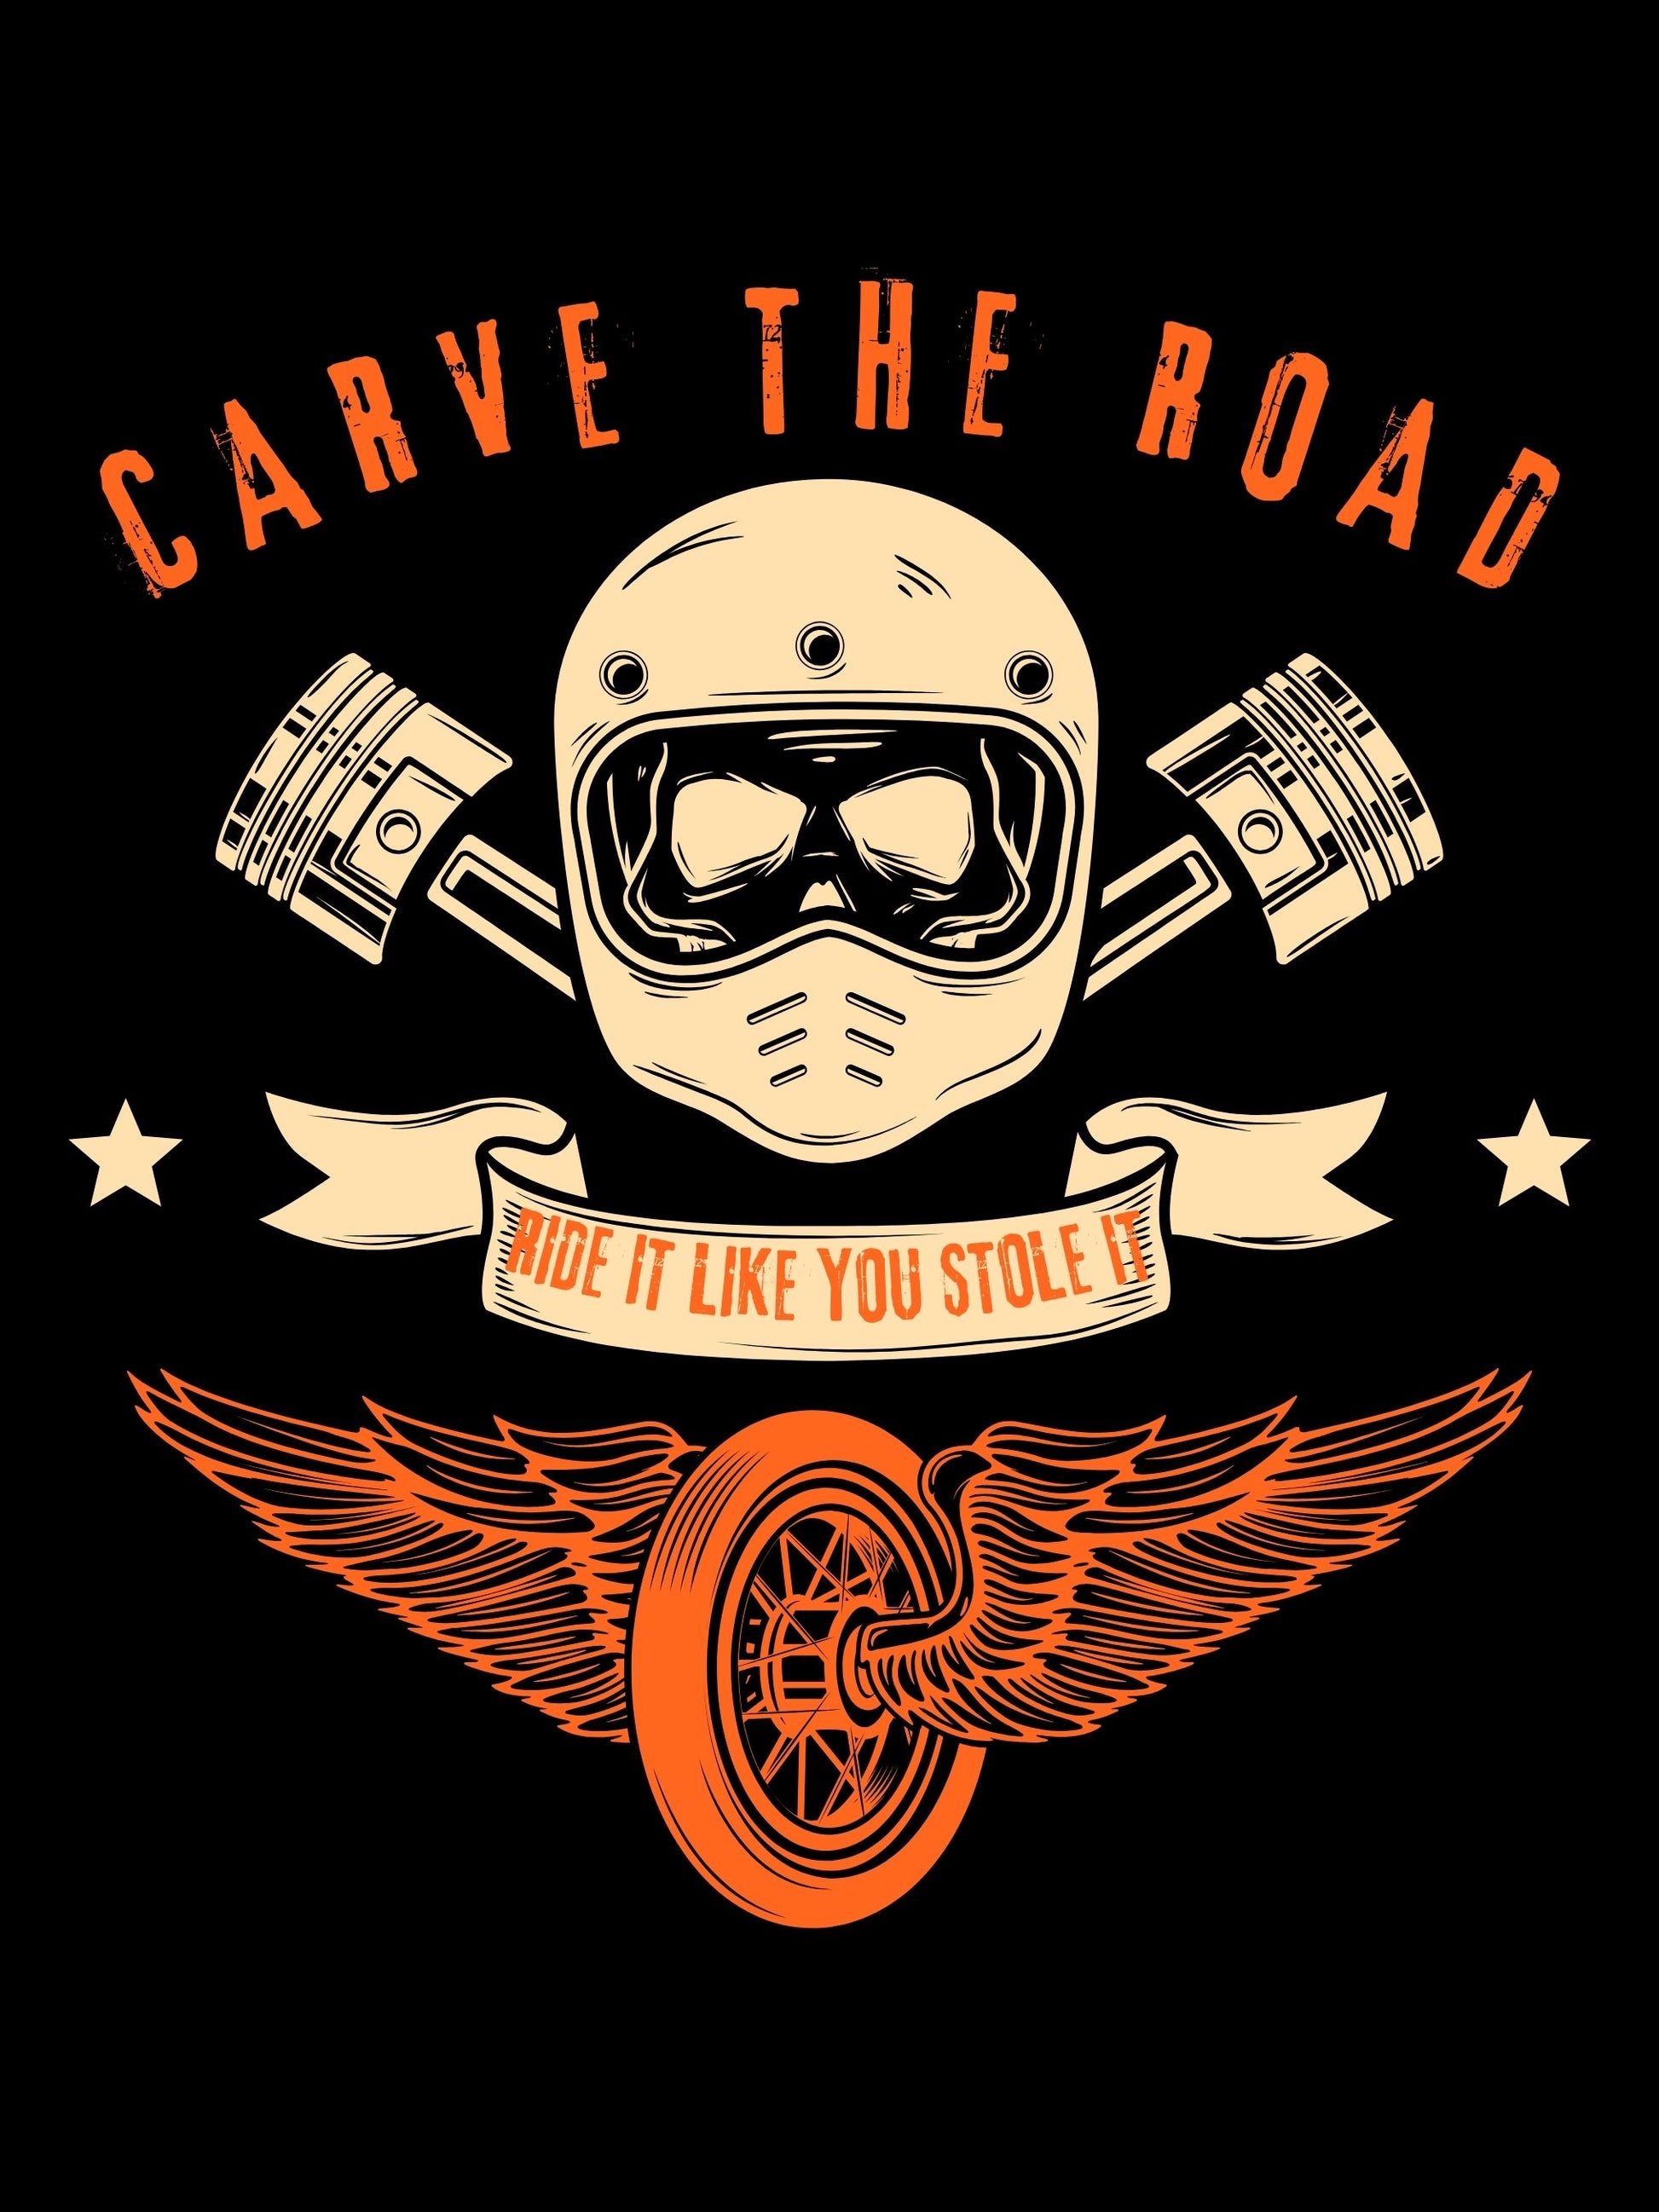 Carve the road, ride it like you stole it